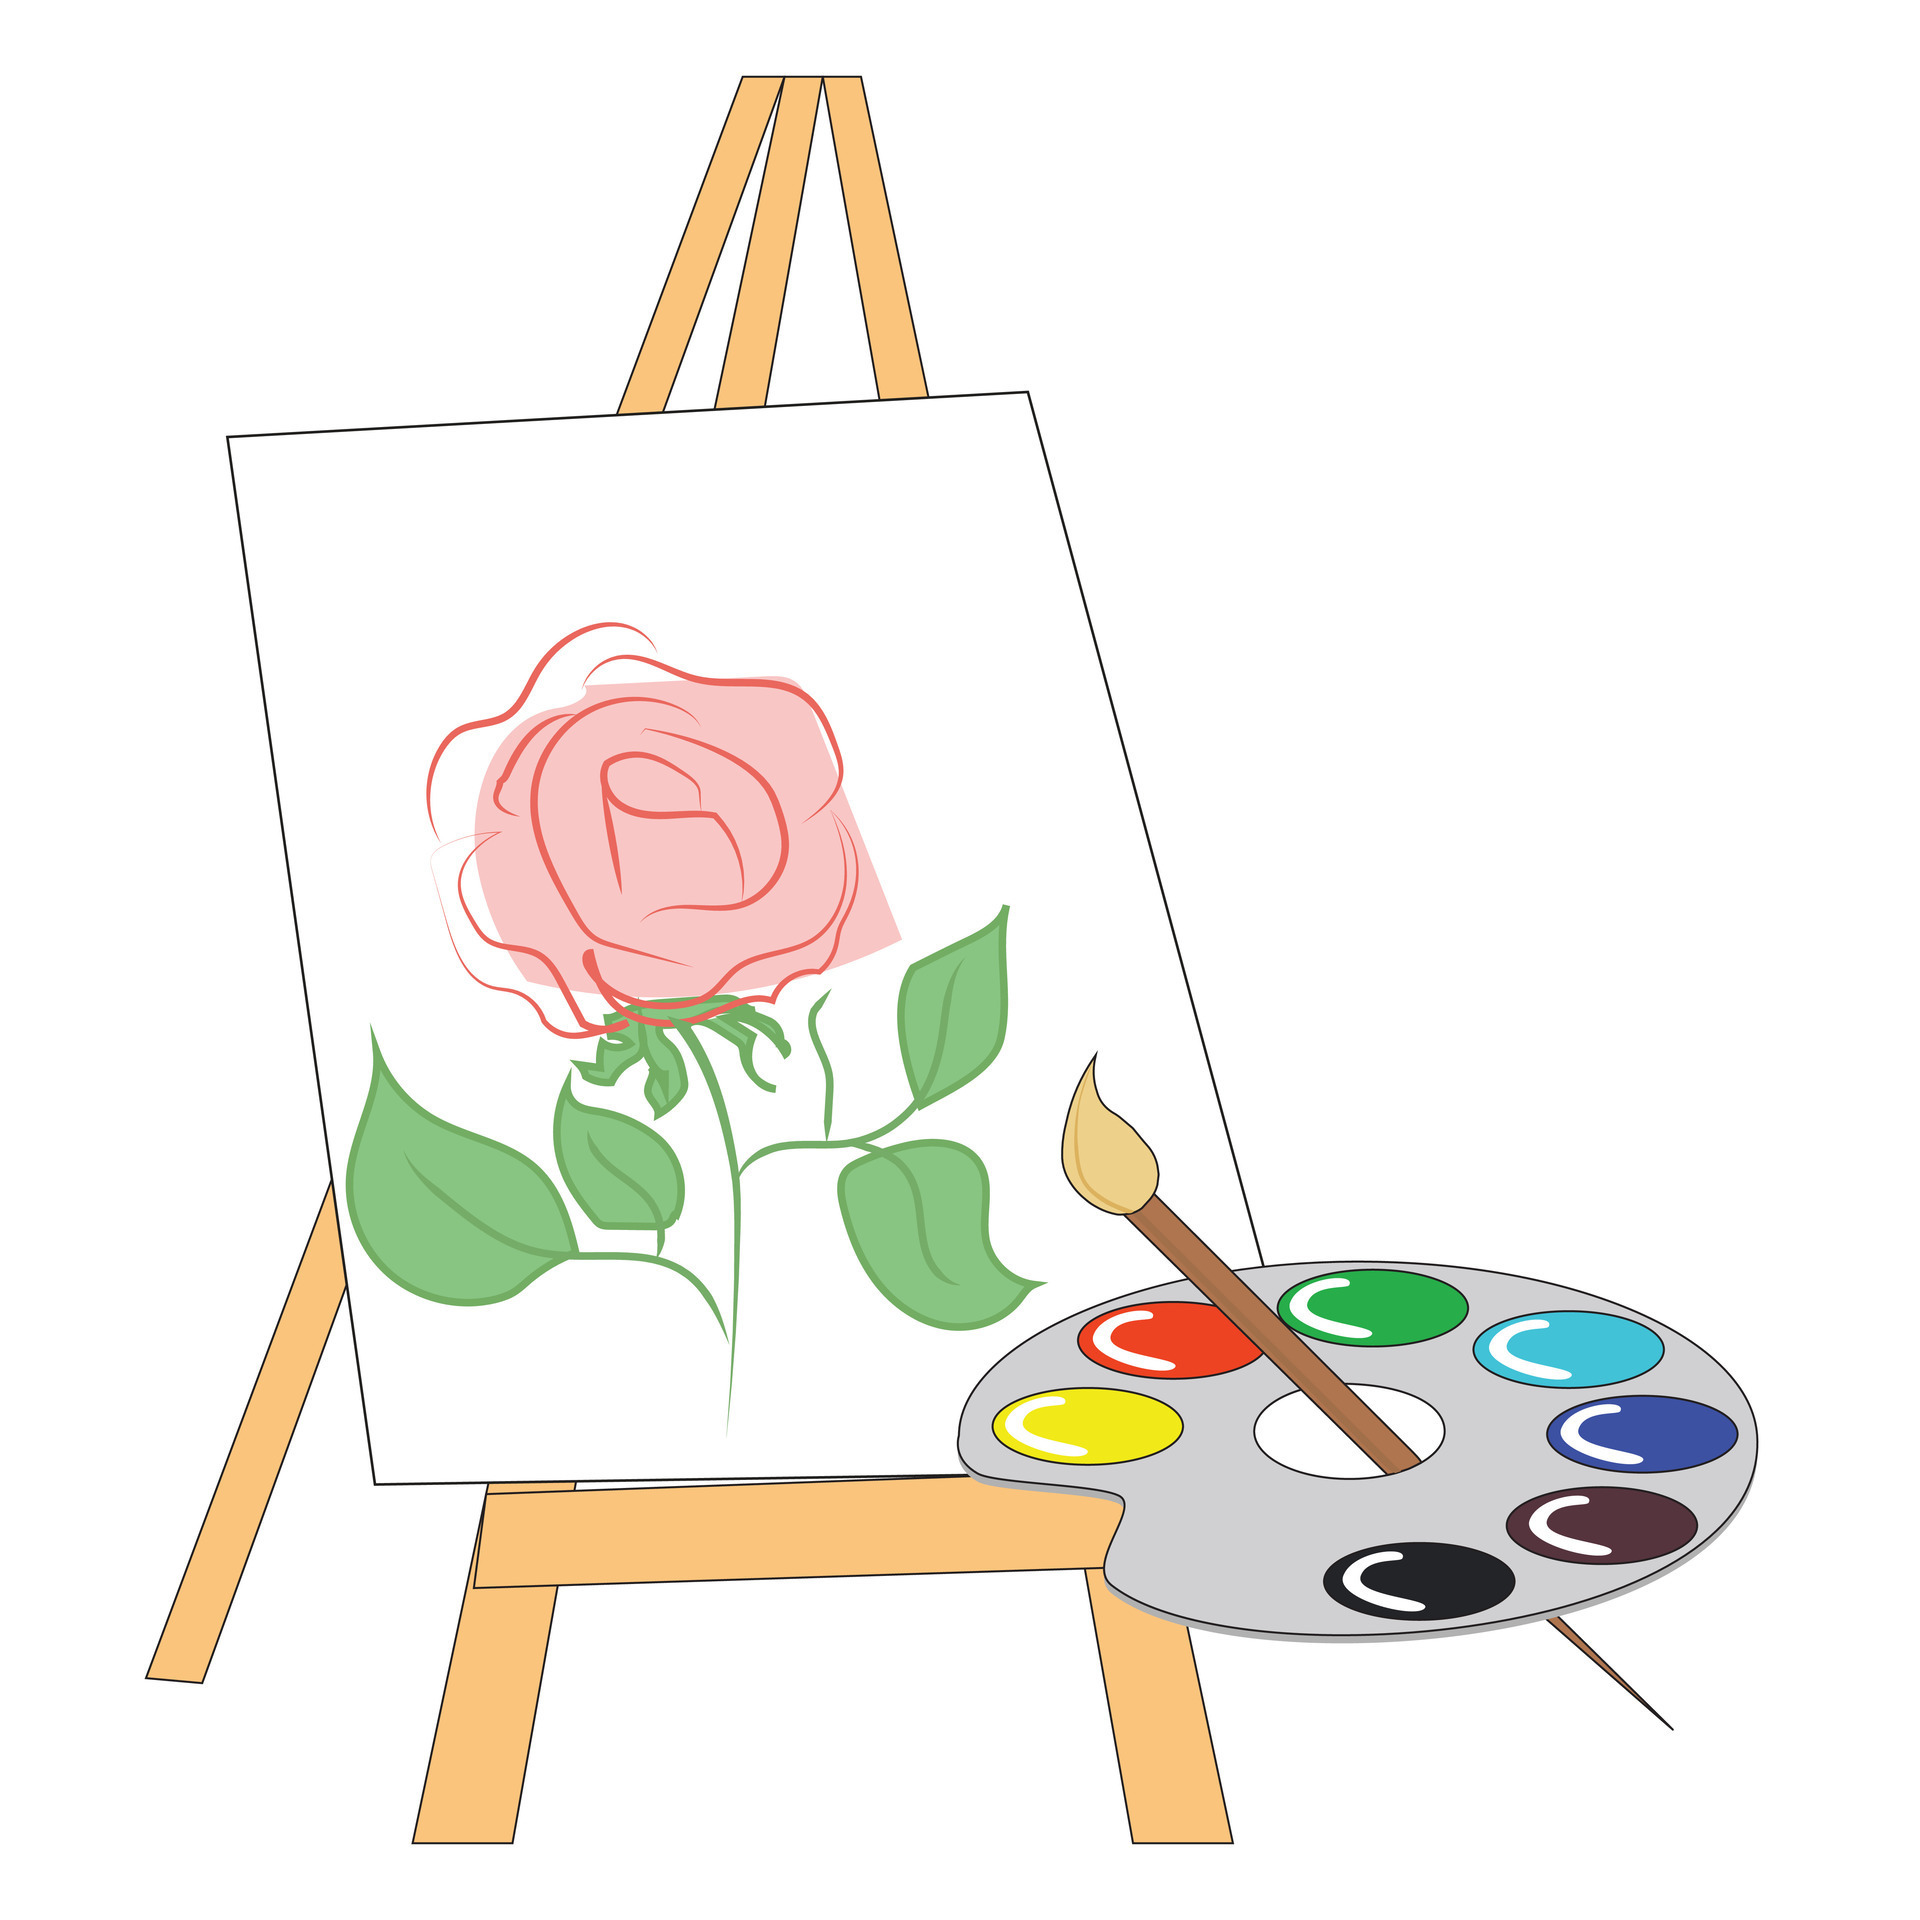 https://static.vecteezy.com/system/resources/previews/025/259/498/original/easel-and-colorful-palette-with-paints-brush-elements-of-the-artist-banner-for-drawing-school-illustration-flat-design-cartoon-style-isolated-on-white-background-vector.jpg